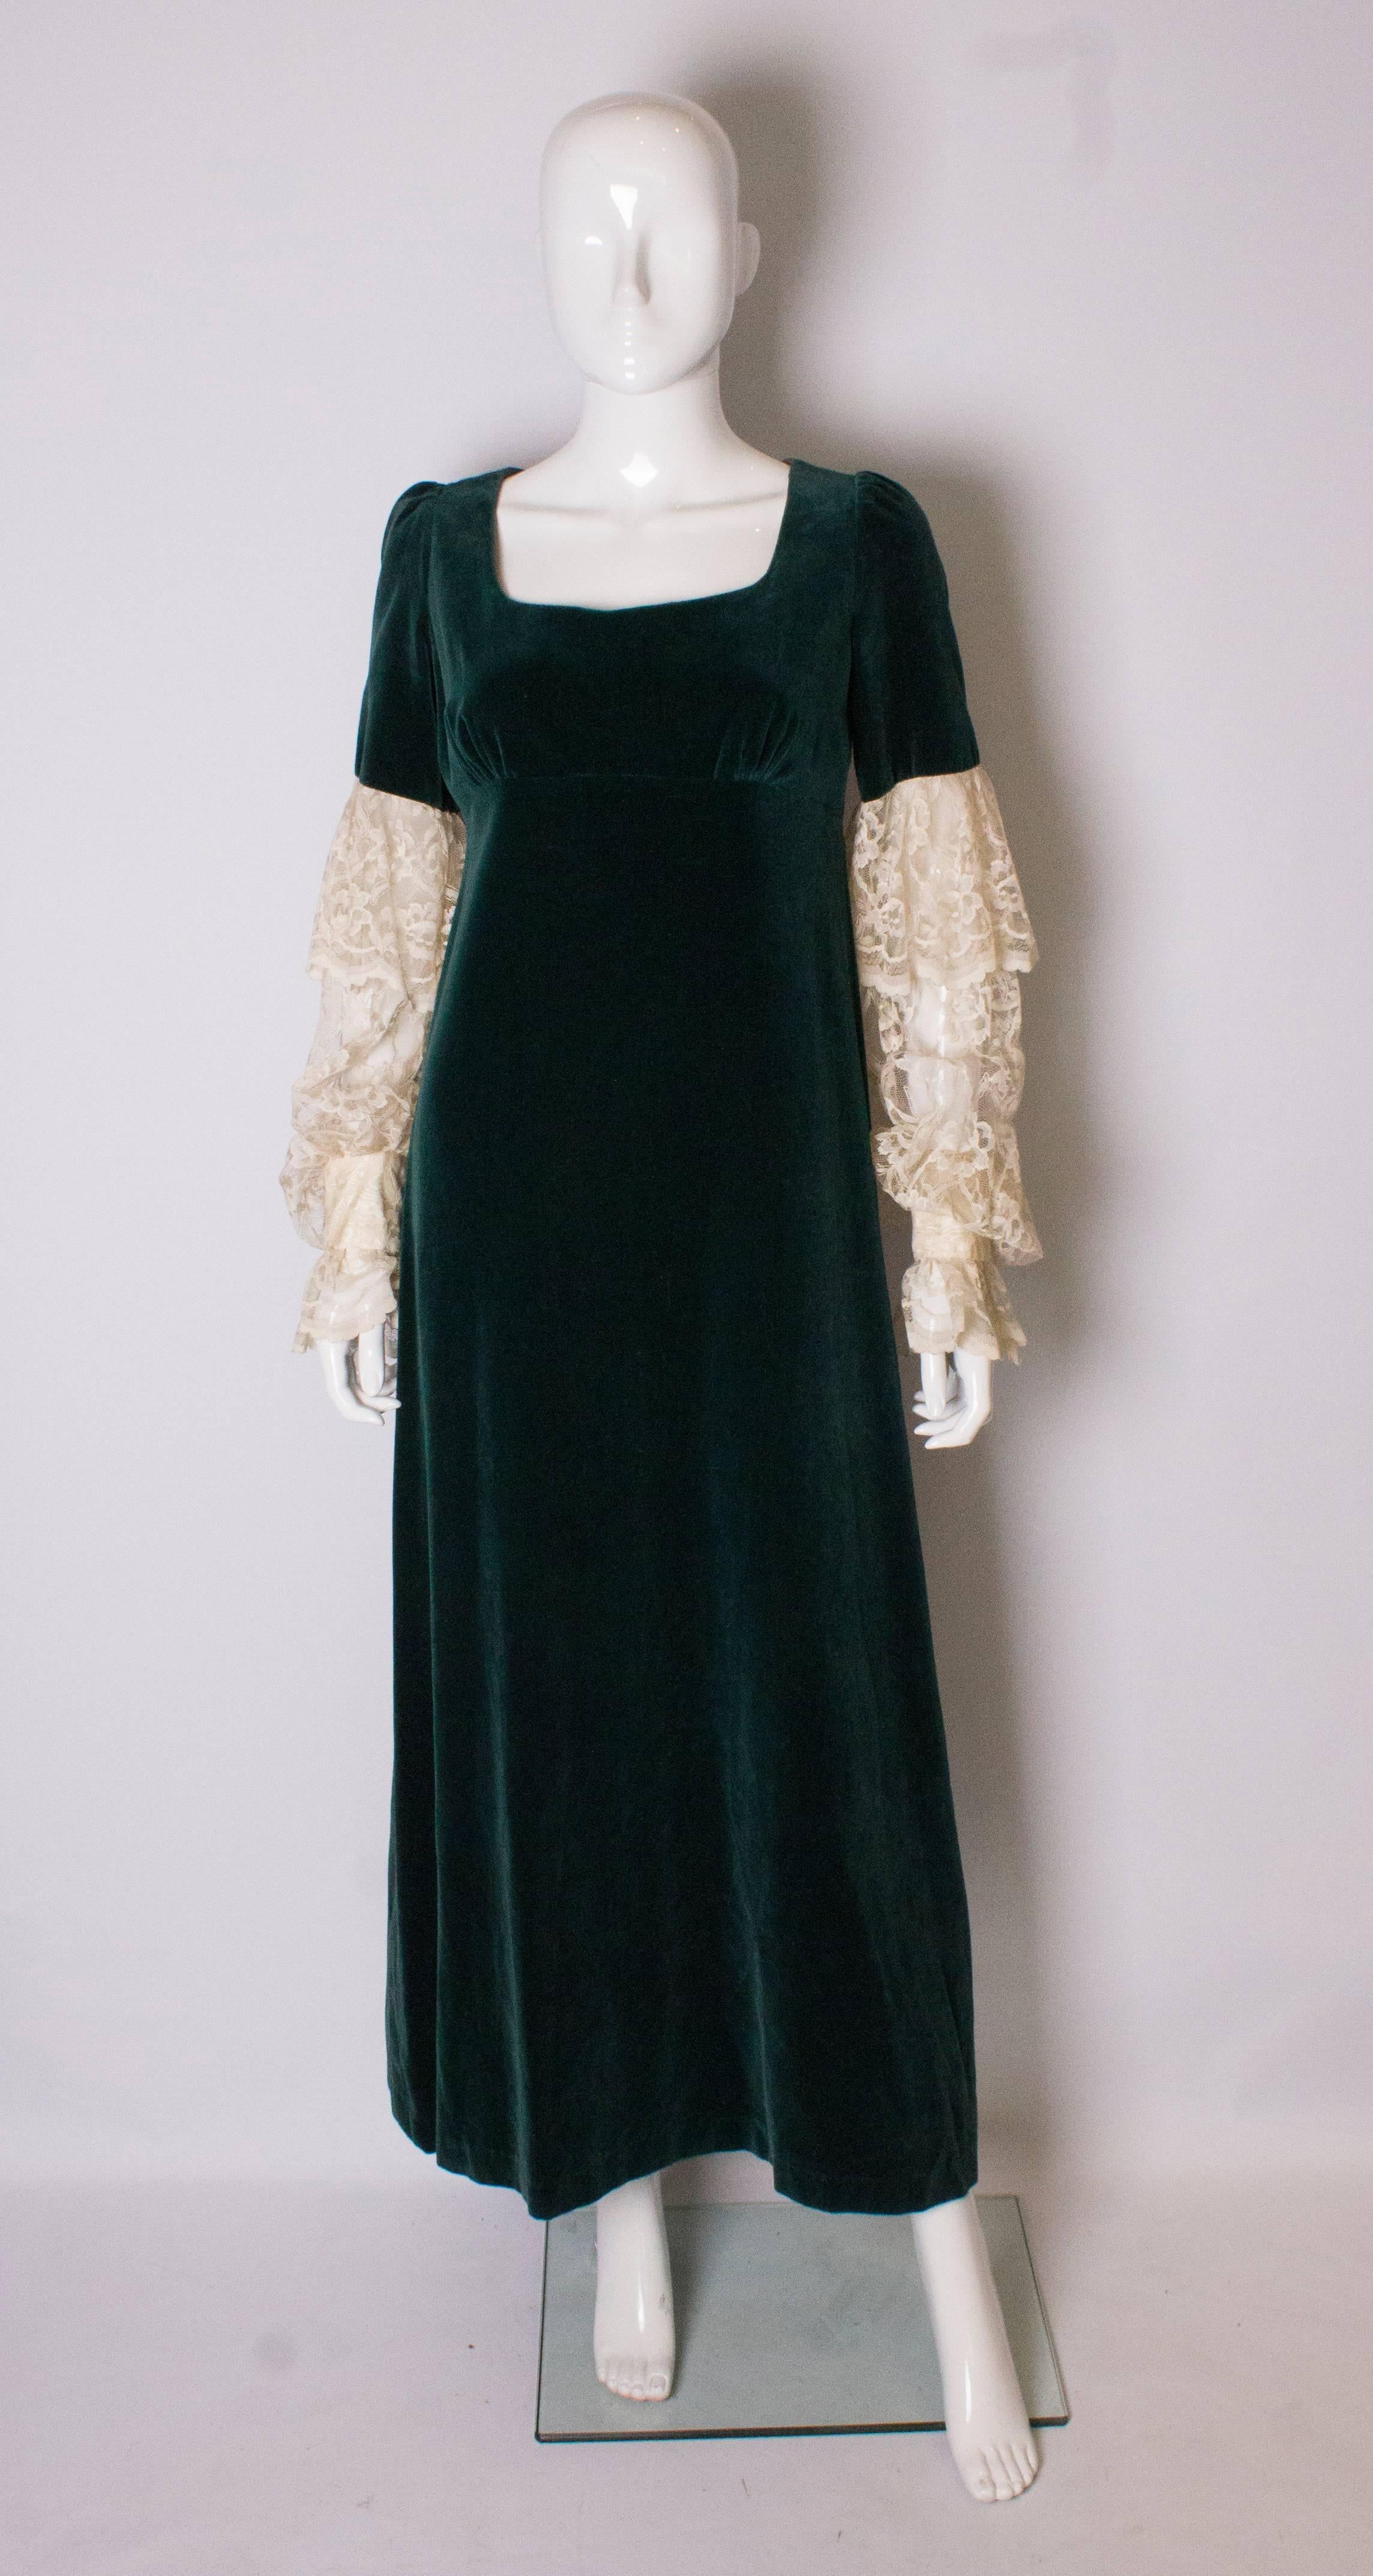 A great vintage  gown by Quad.  The body of the dress is in green velvet  with a low scoop neck, and short sleeves. The rest of the sleeves are white lace with 2 popper cuffs. The dress is fully lined.